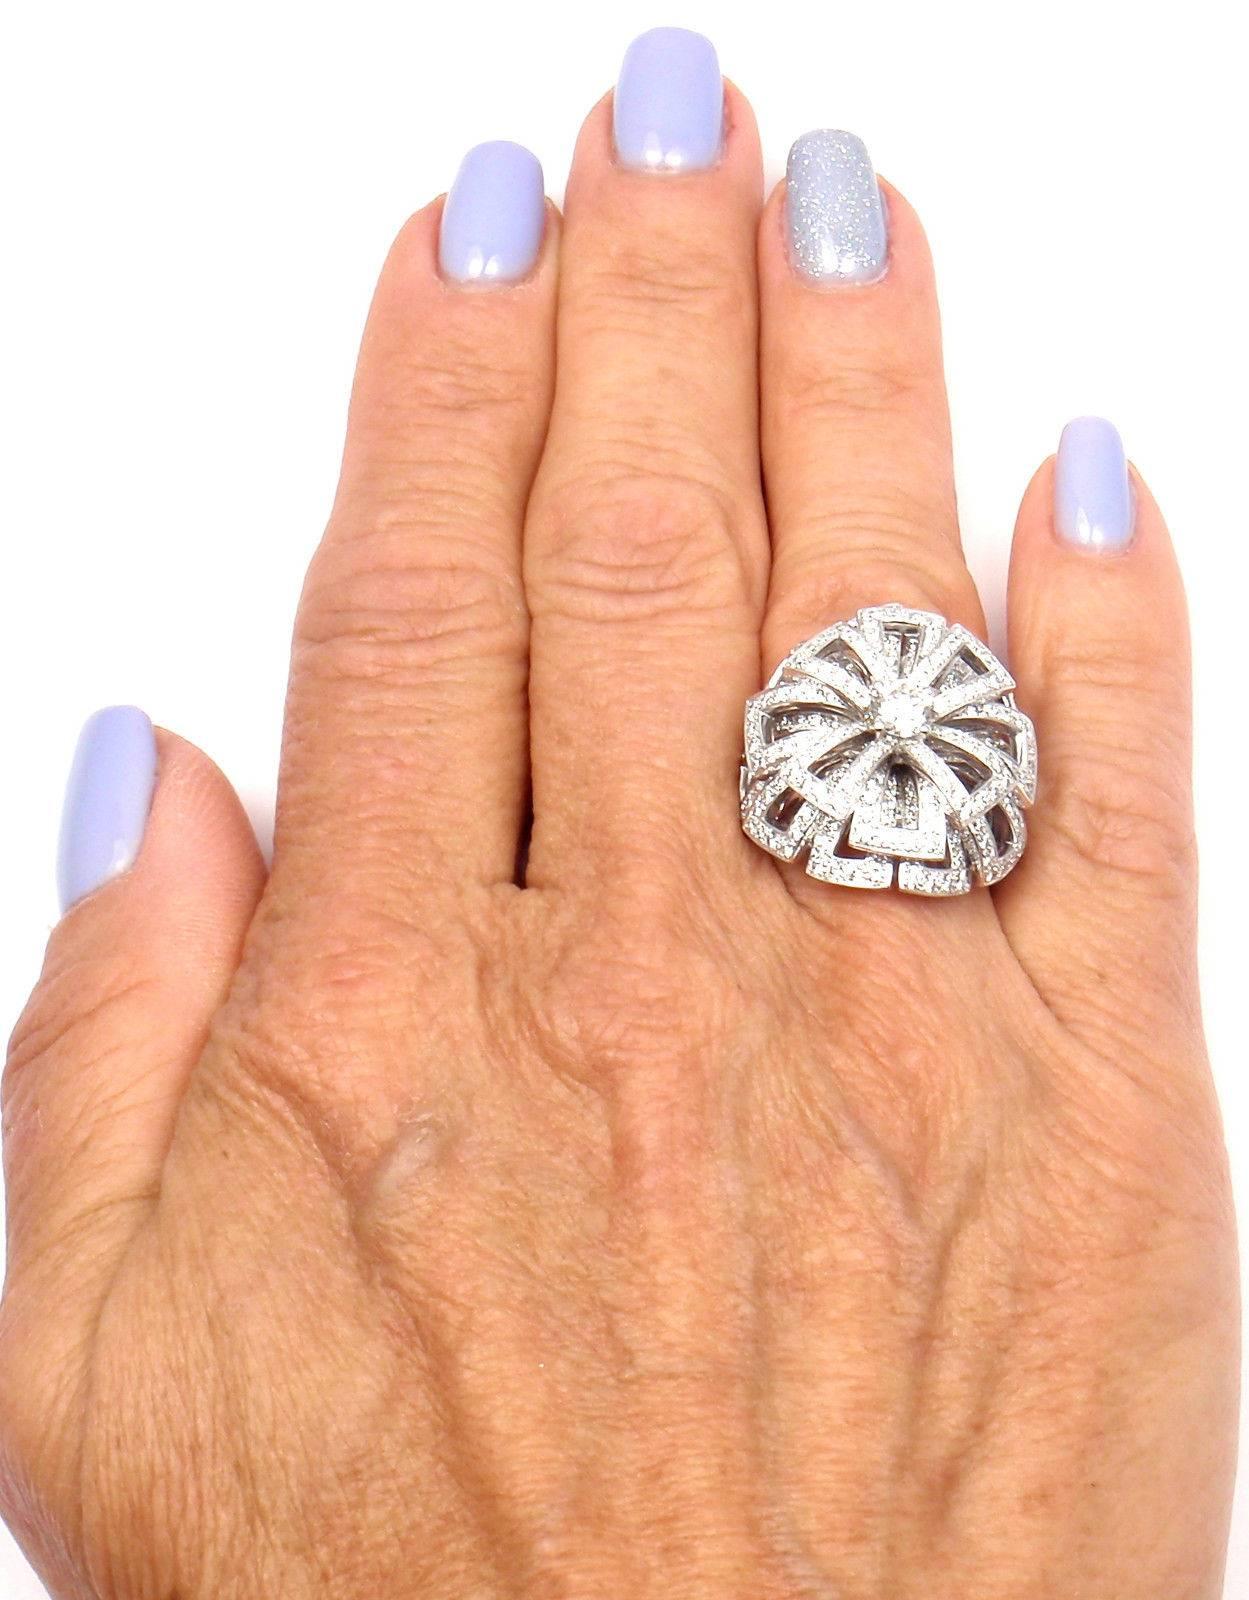 Chanel Diamond Large White Gold Flower Ring In New Condition For Sale In Holland, PA